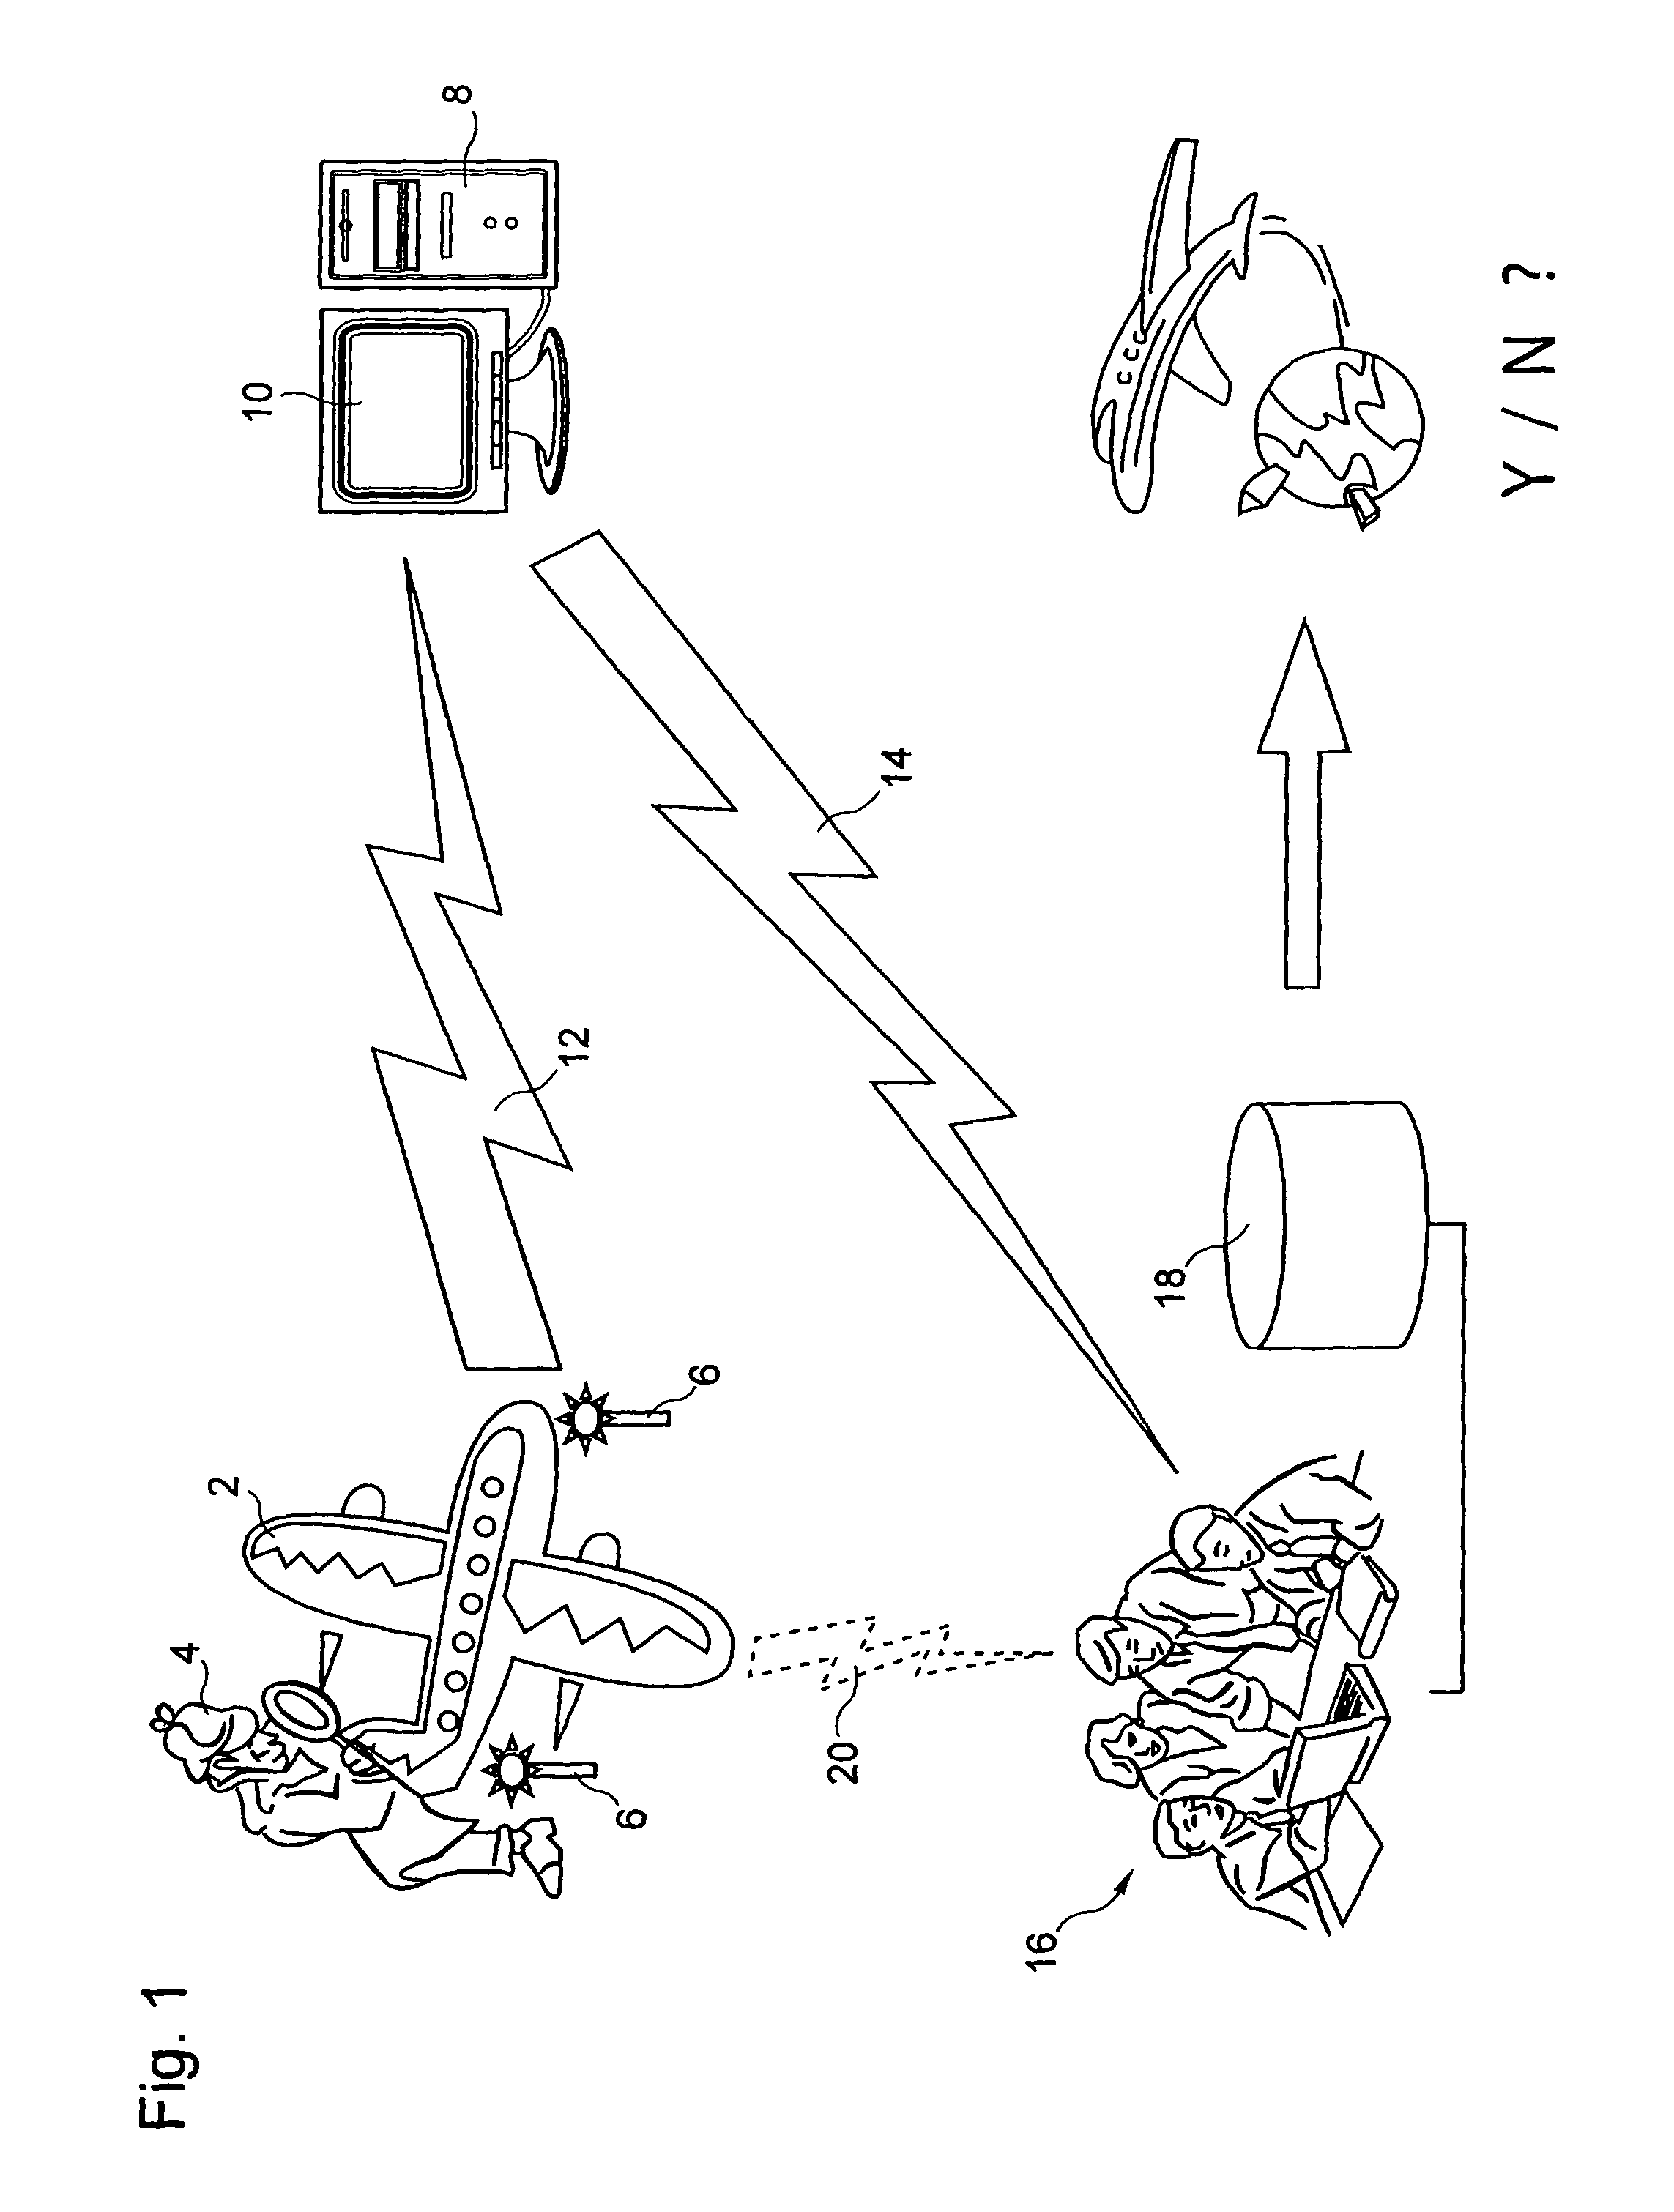 Diagnostic tool for repairing aircraft and method of using such a tool